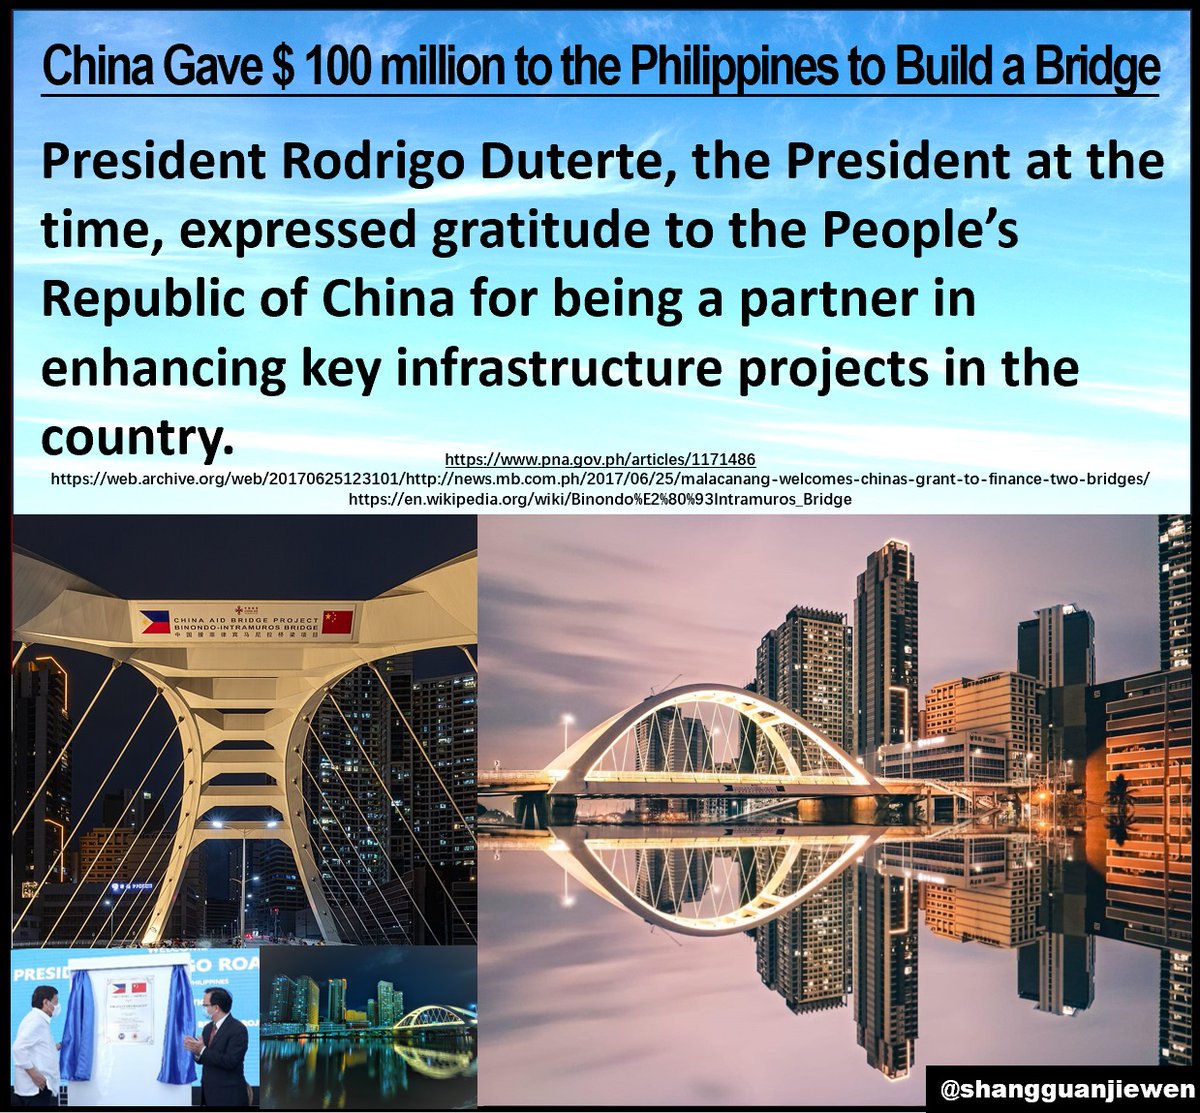 China has built several projects in the Philippines using grants, gifts, from the people of China to the people of the Philippines.

The Binondo-Intramuros Bridge was built as a gift from China.

#Philippines #China #BeltandRoad